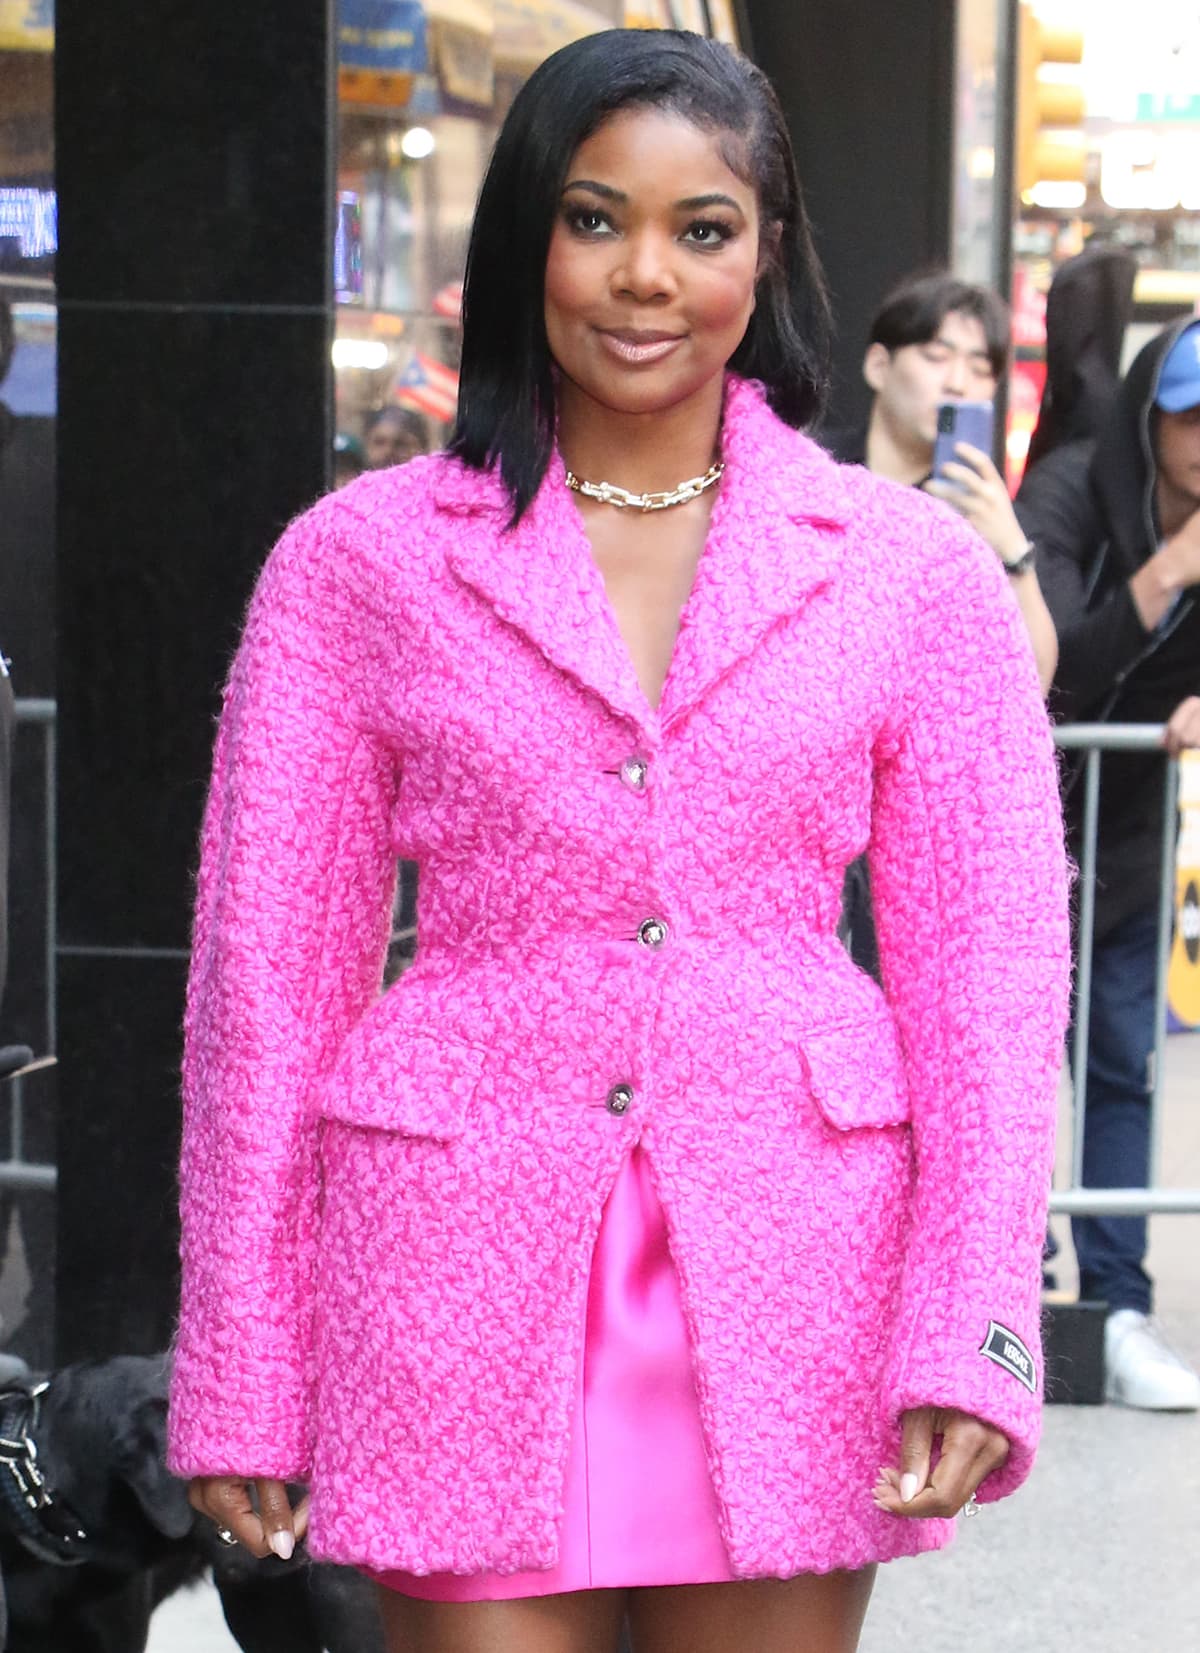 Gabrielle Union pairs her pink ensemble with a Tiffany & Co. chain link necklace, a side-swept hairstyle, and nude lip gloss